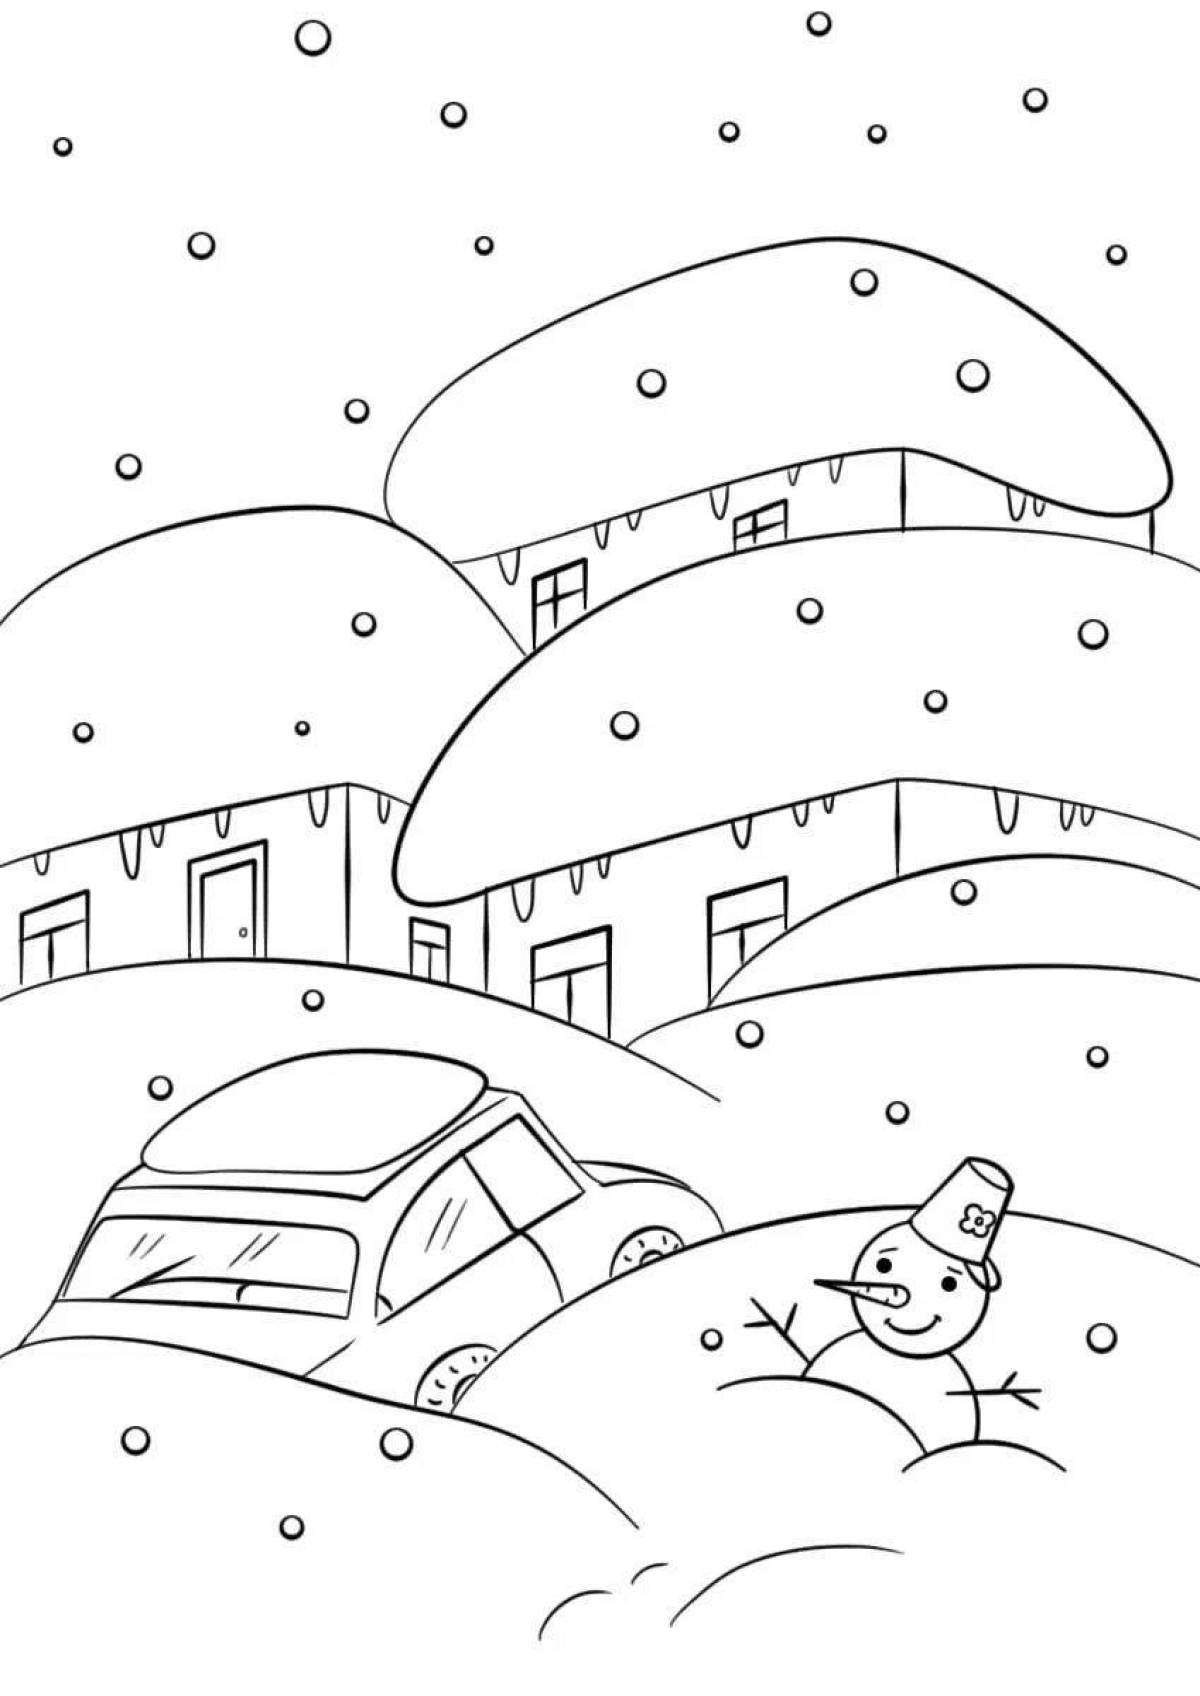 Awesome snow coloring book